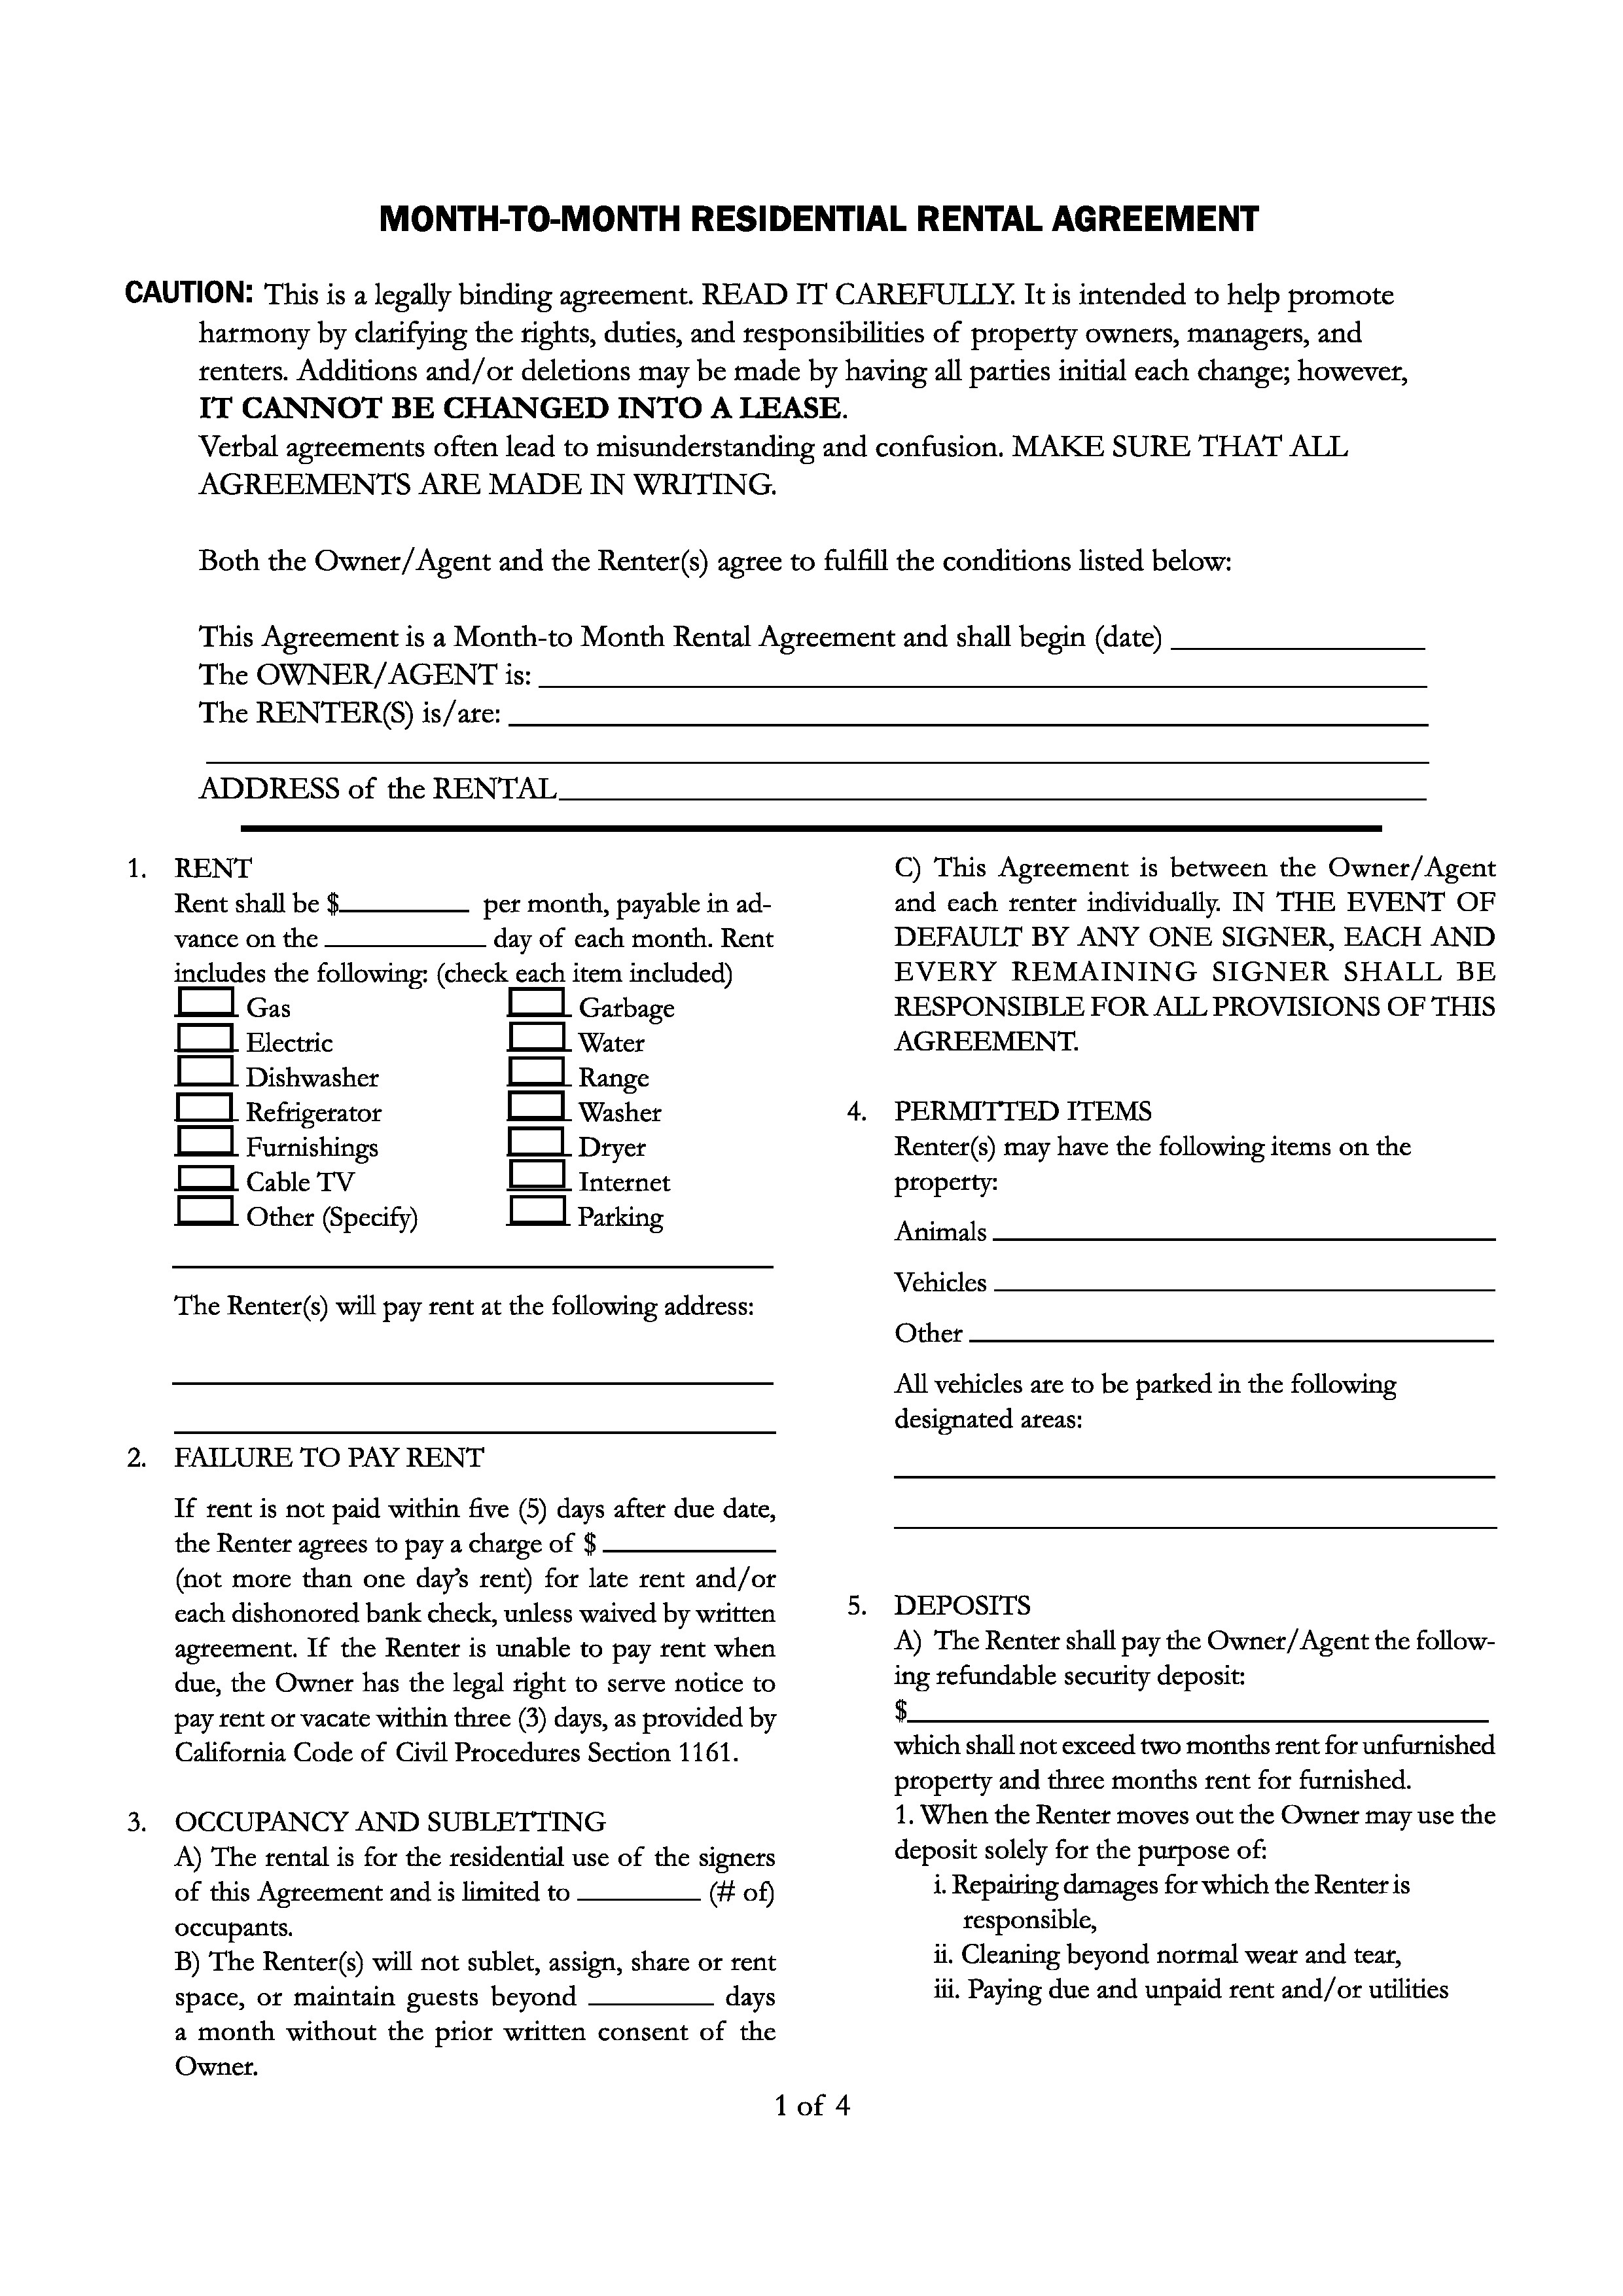 California Residential Lease Or Month To Month Rental Agreement Download Free California Month To Month Rental Agreement Printable